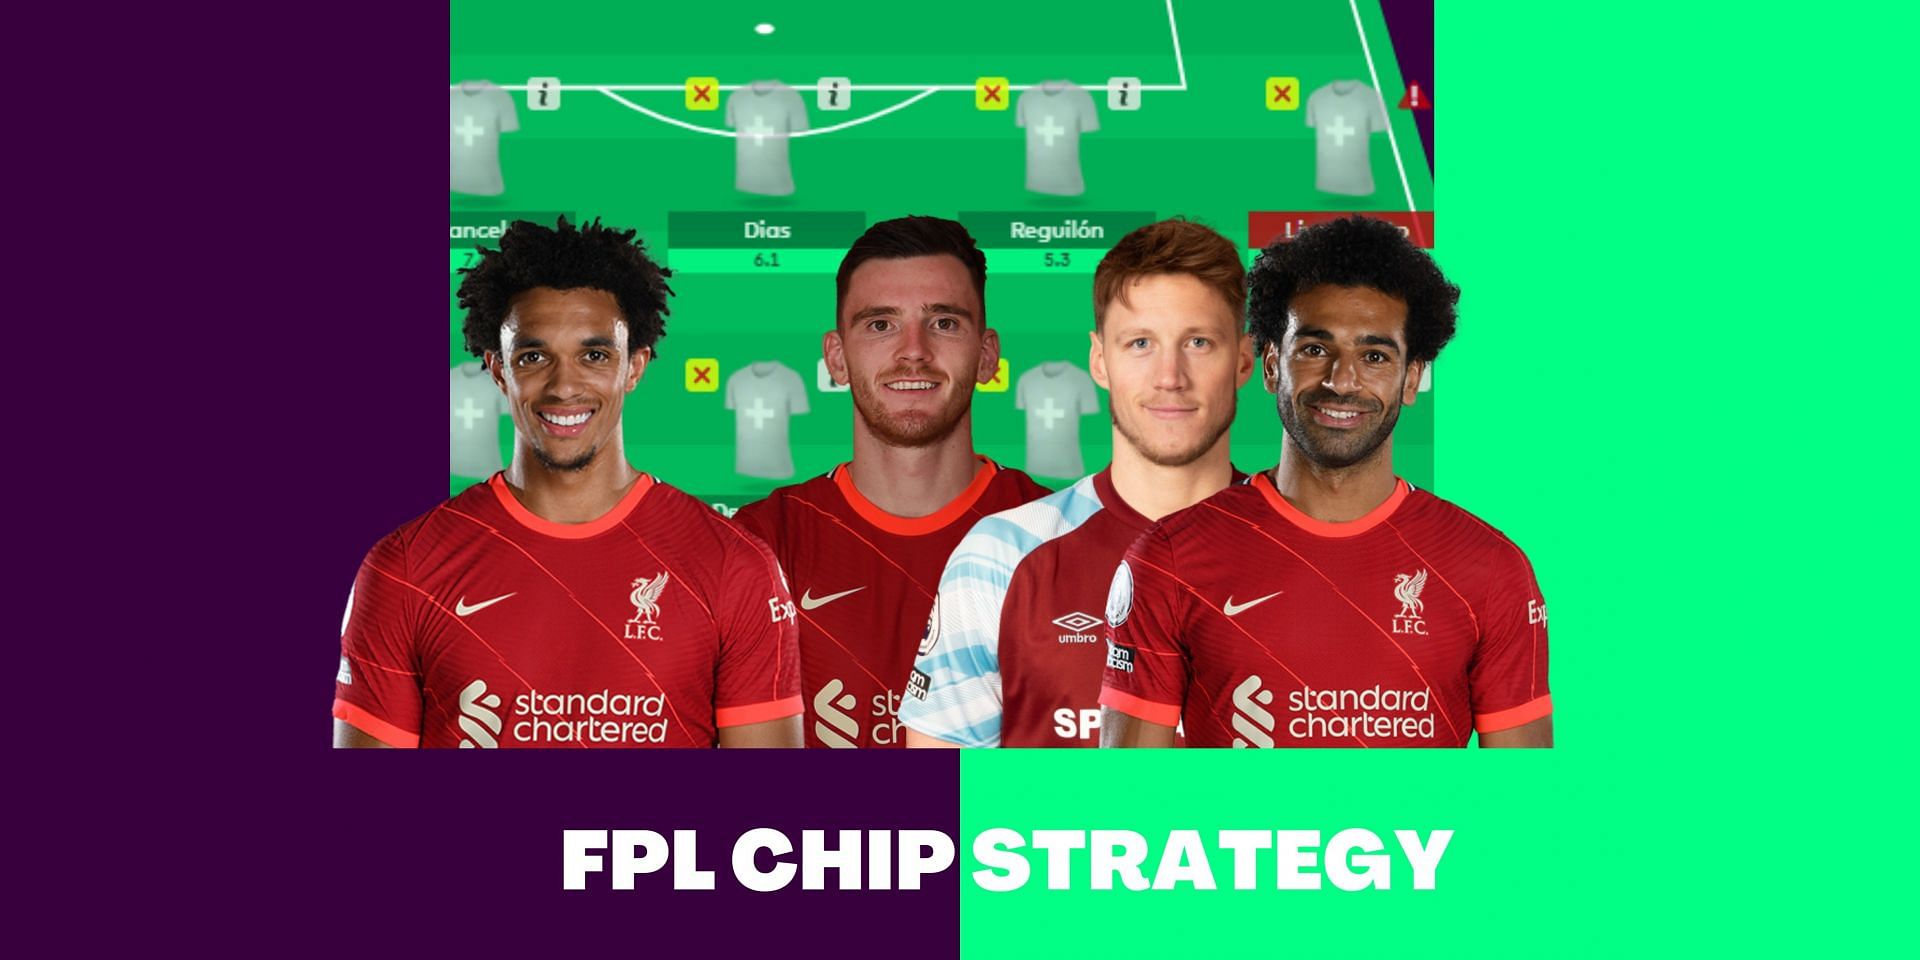 FPL chip strategy guide from now until end of the season